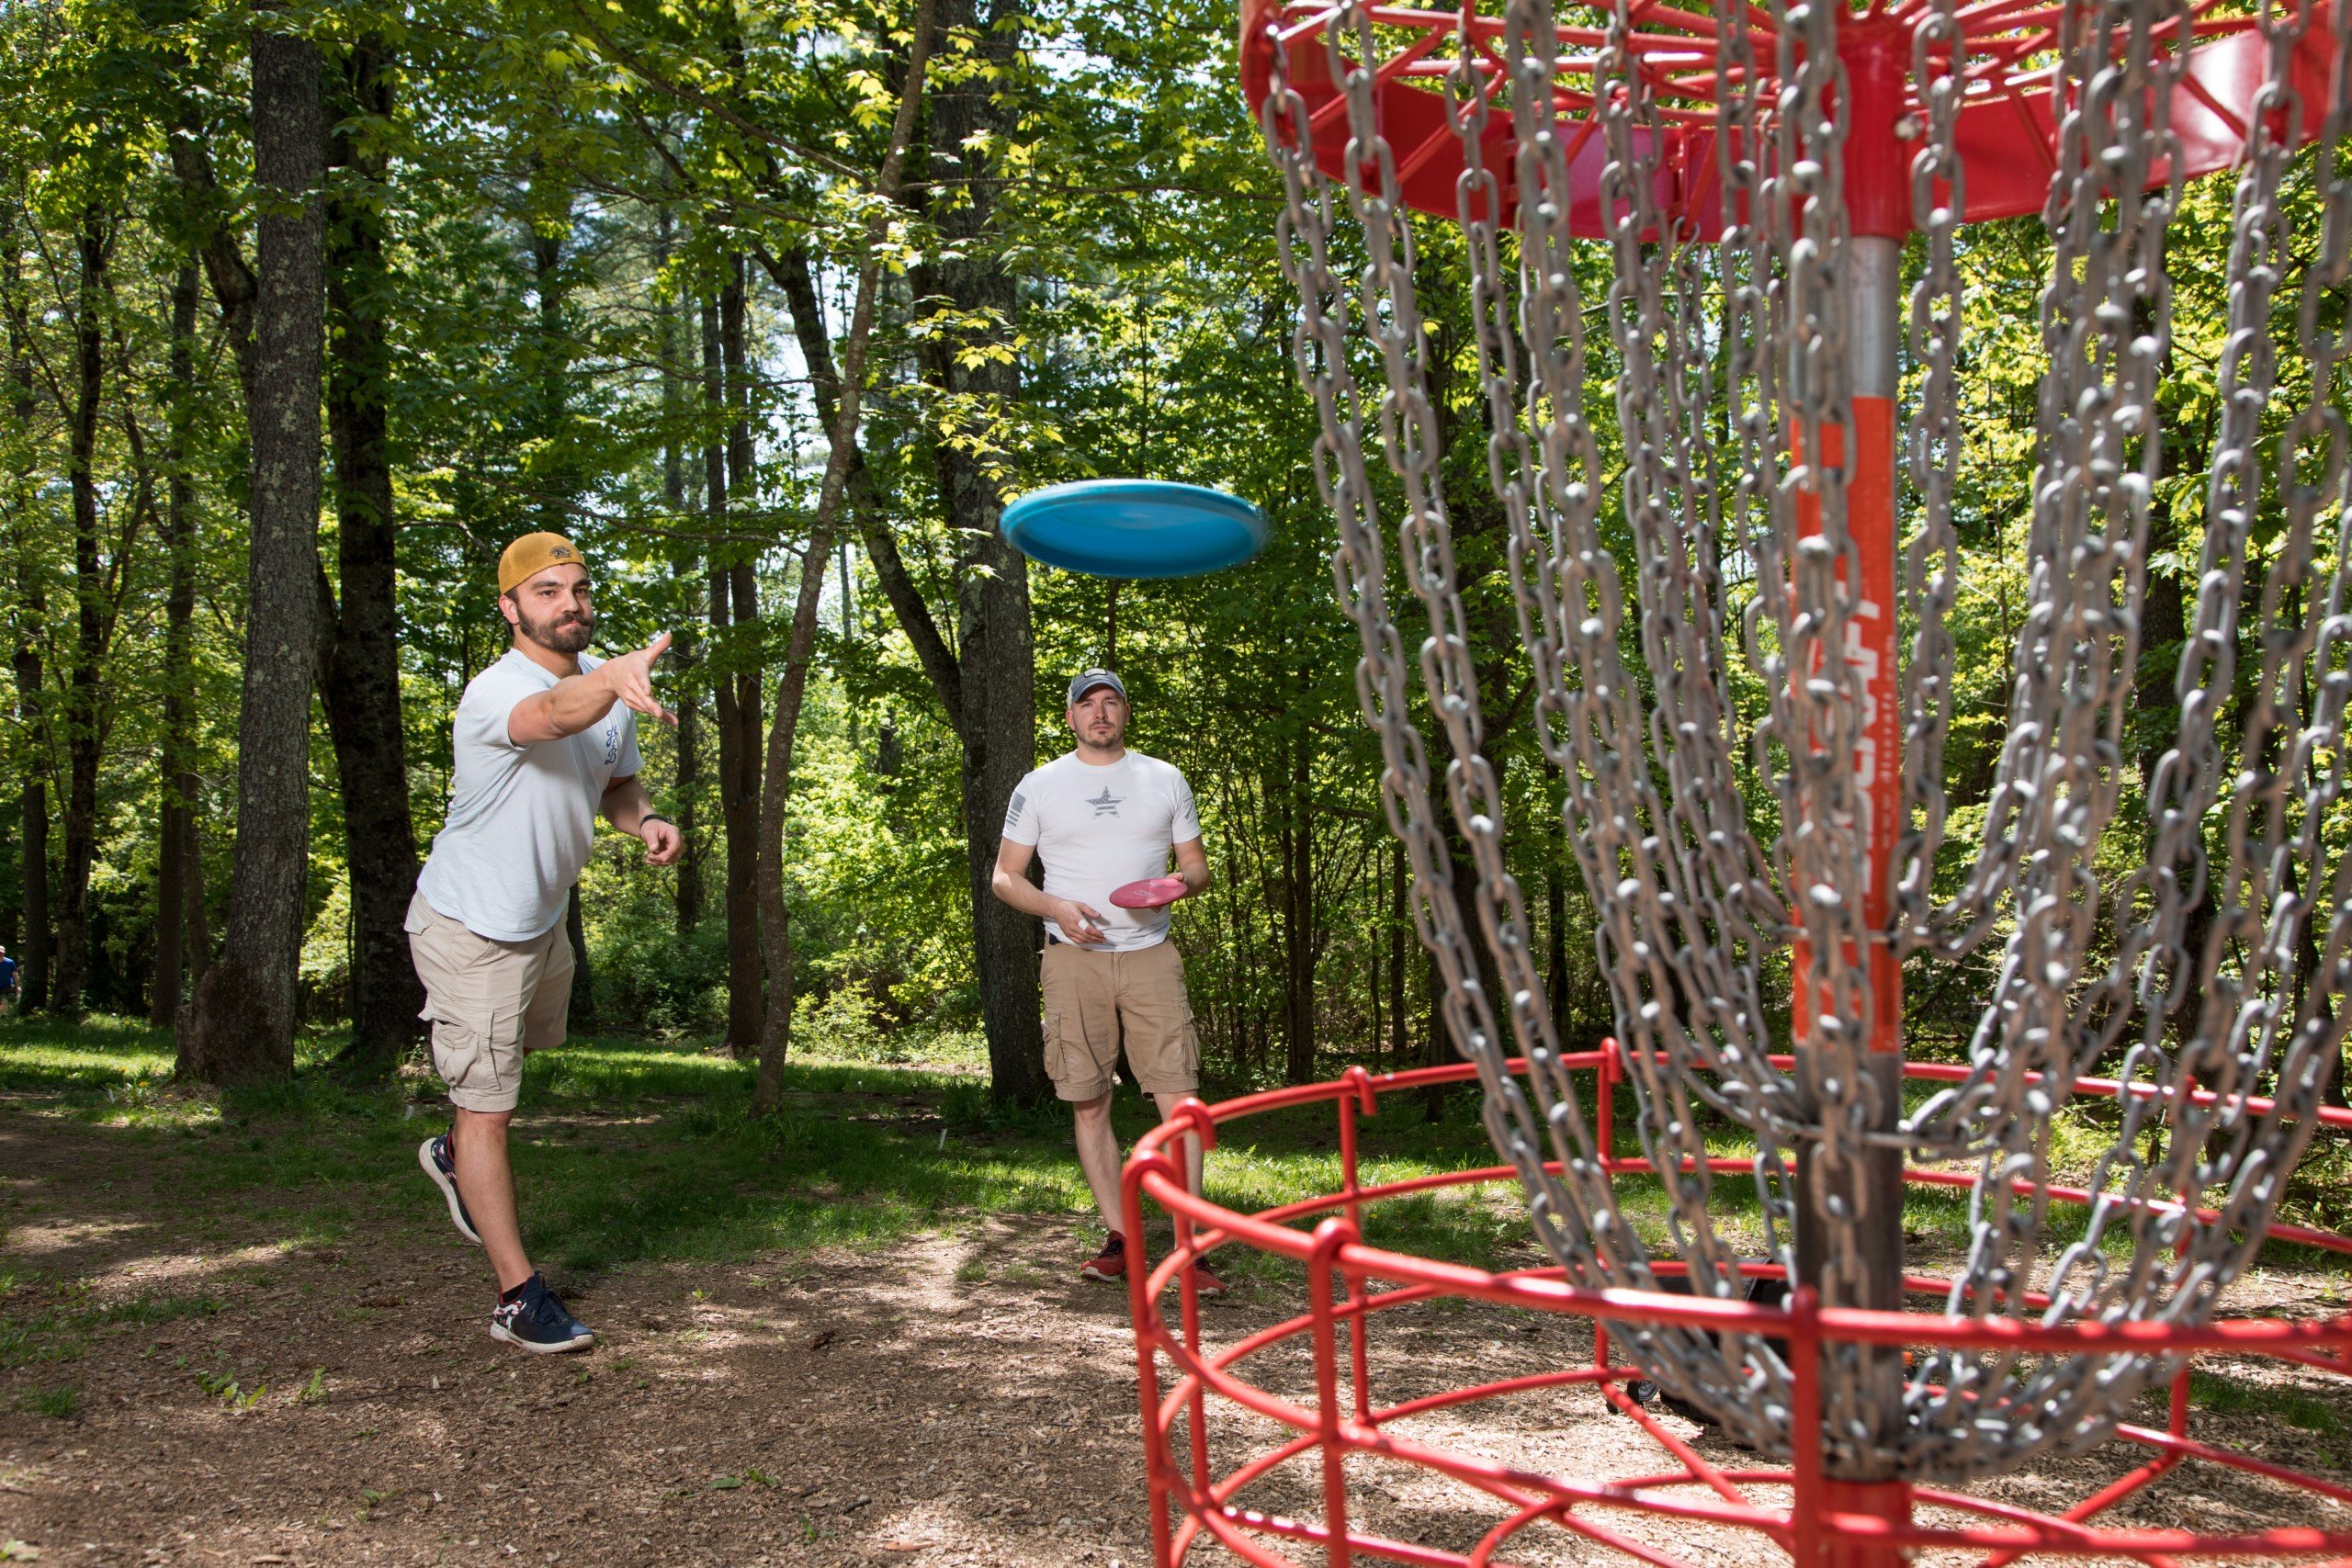 Learn to Play Disc Golf - New Hampshire Magazine